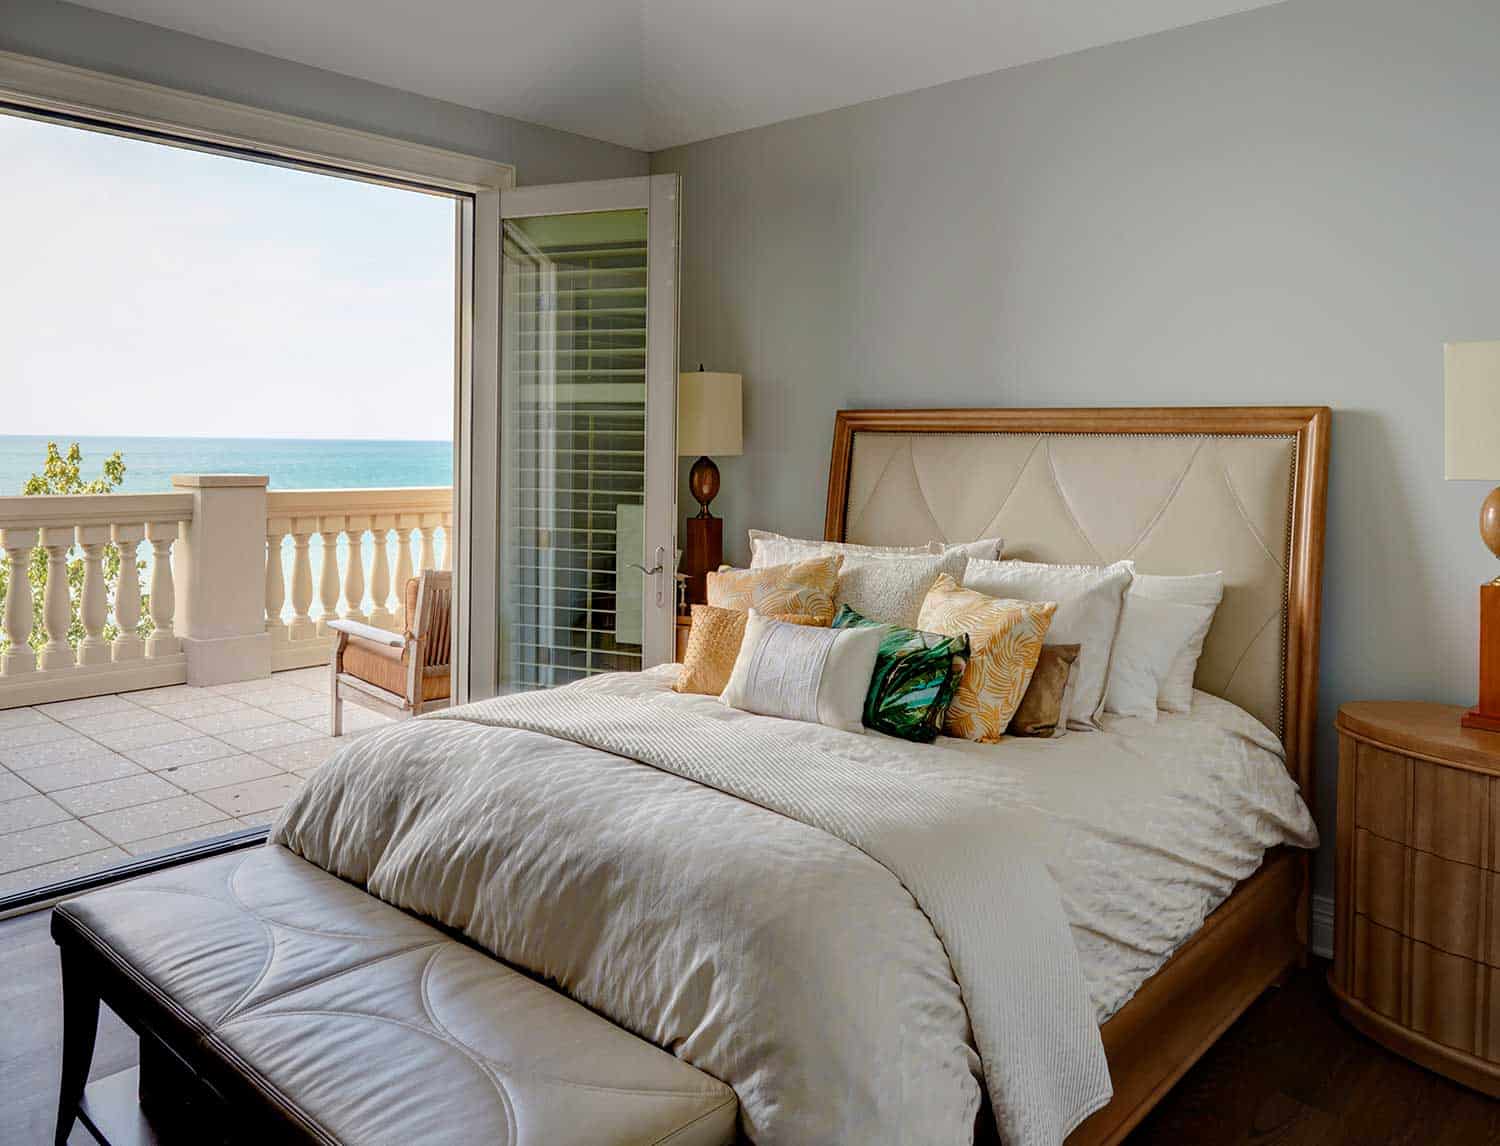 guest-bedroom-french-doors-open-to-patio-lake